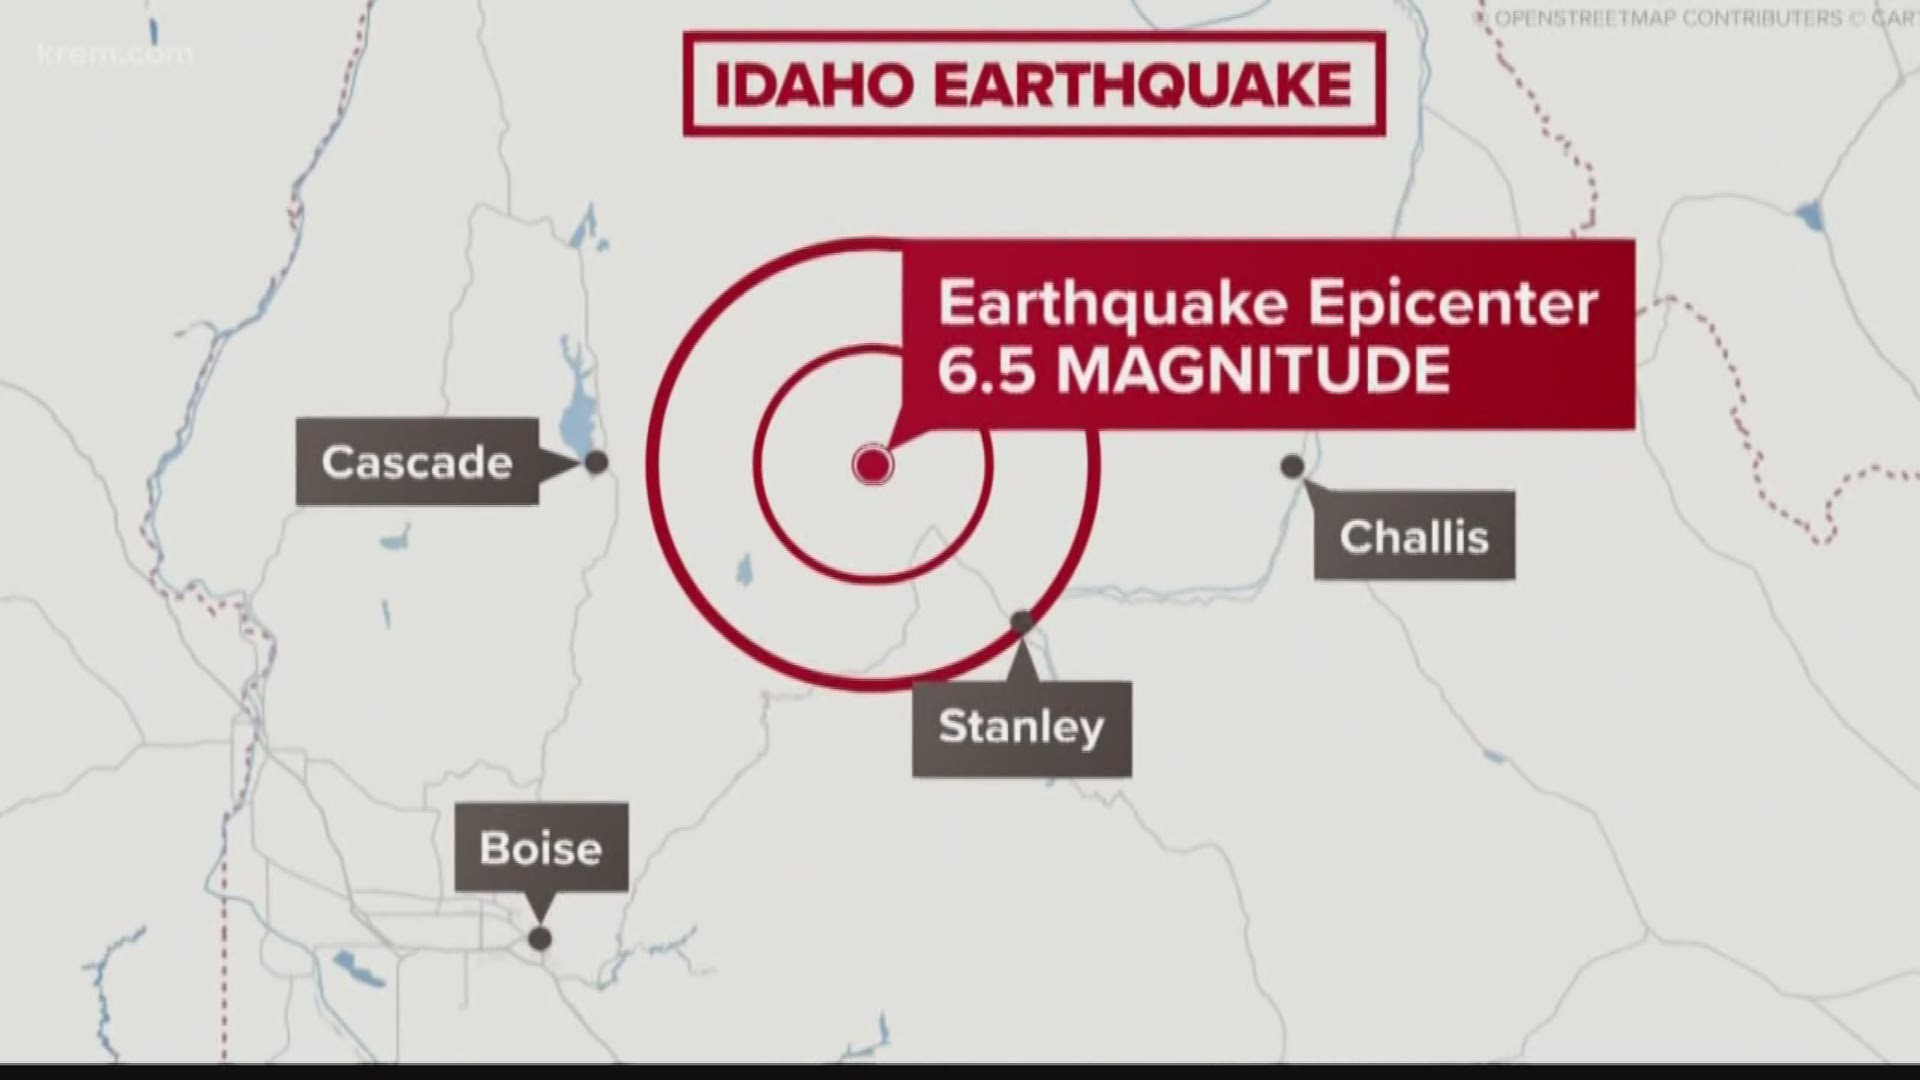 While Tuesday's earthquake in Central Idaho was one of the largest in its history, geologist say it's not uncommon for them to happen in the region.